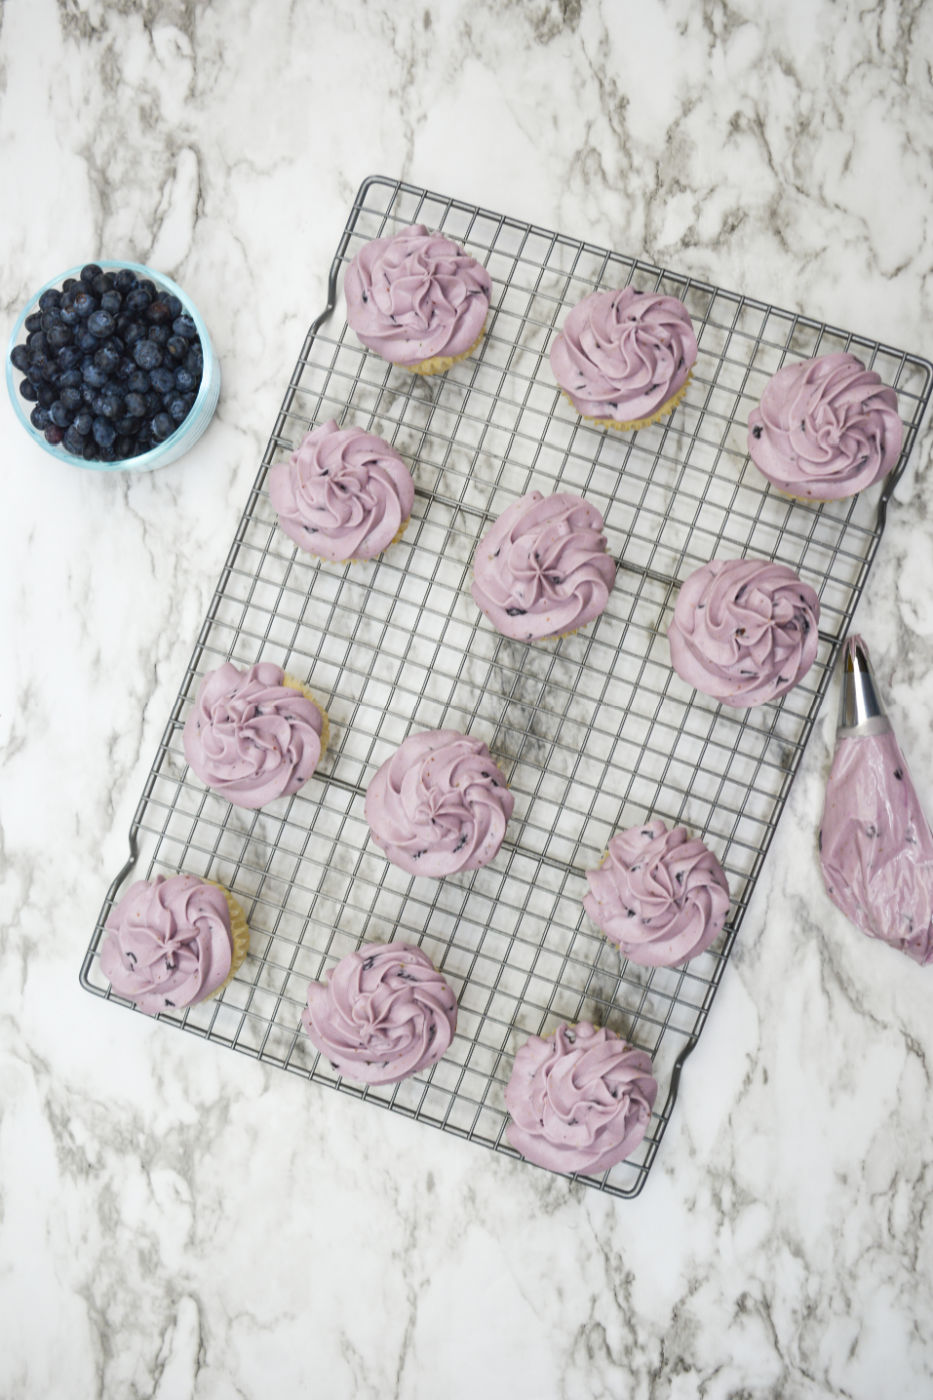 Cooling rack topped with frosted blueberry cupcakes